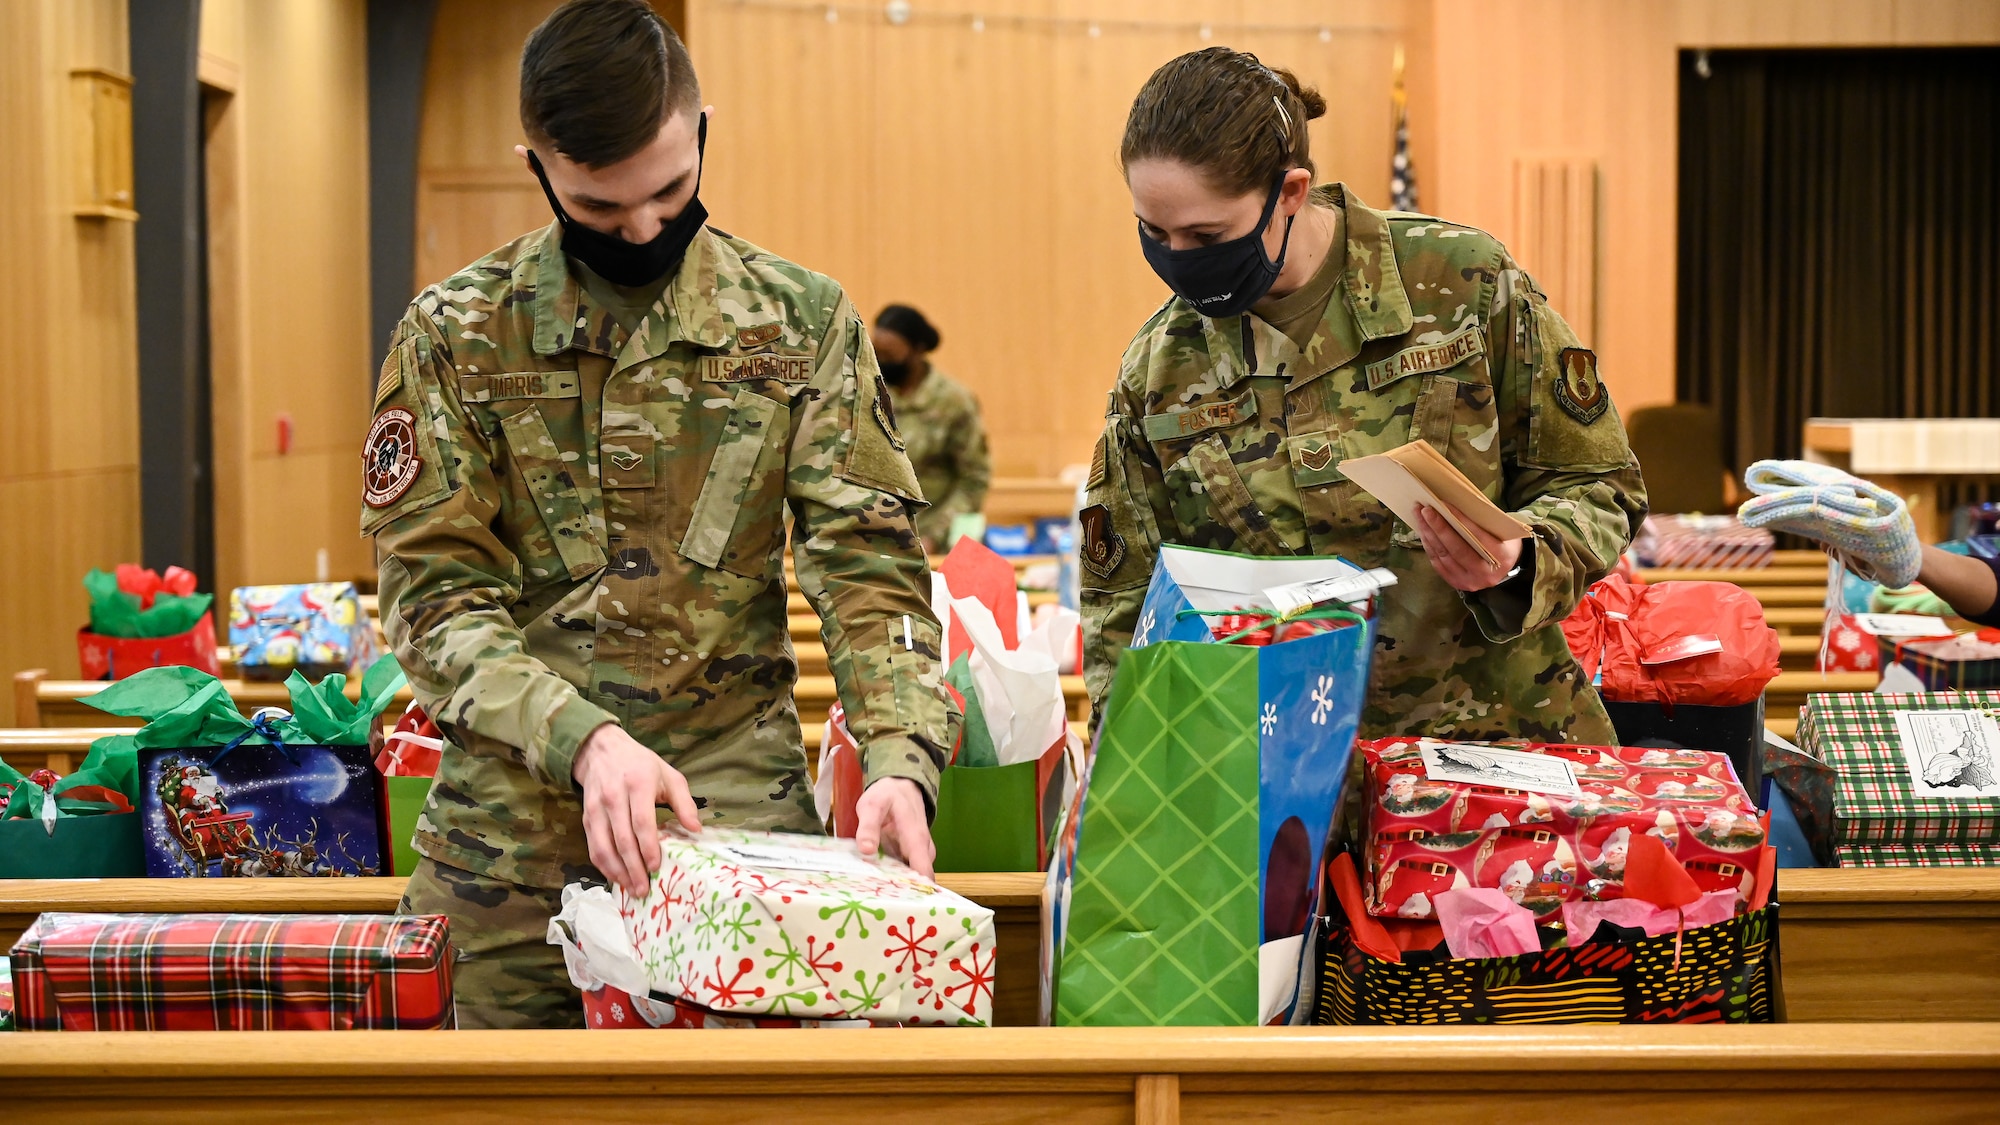 Volunteers sort Angel Tree wrapped gifts on pews inside the base chapel.